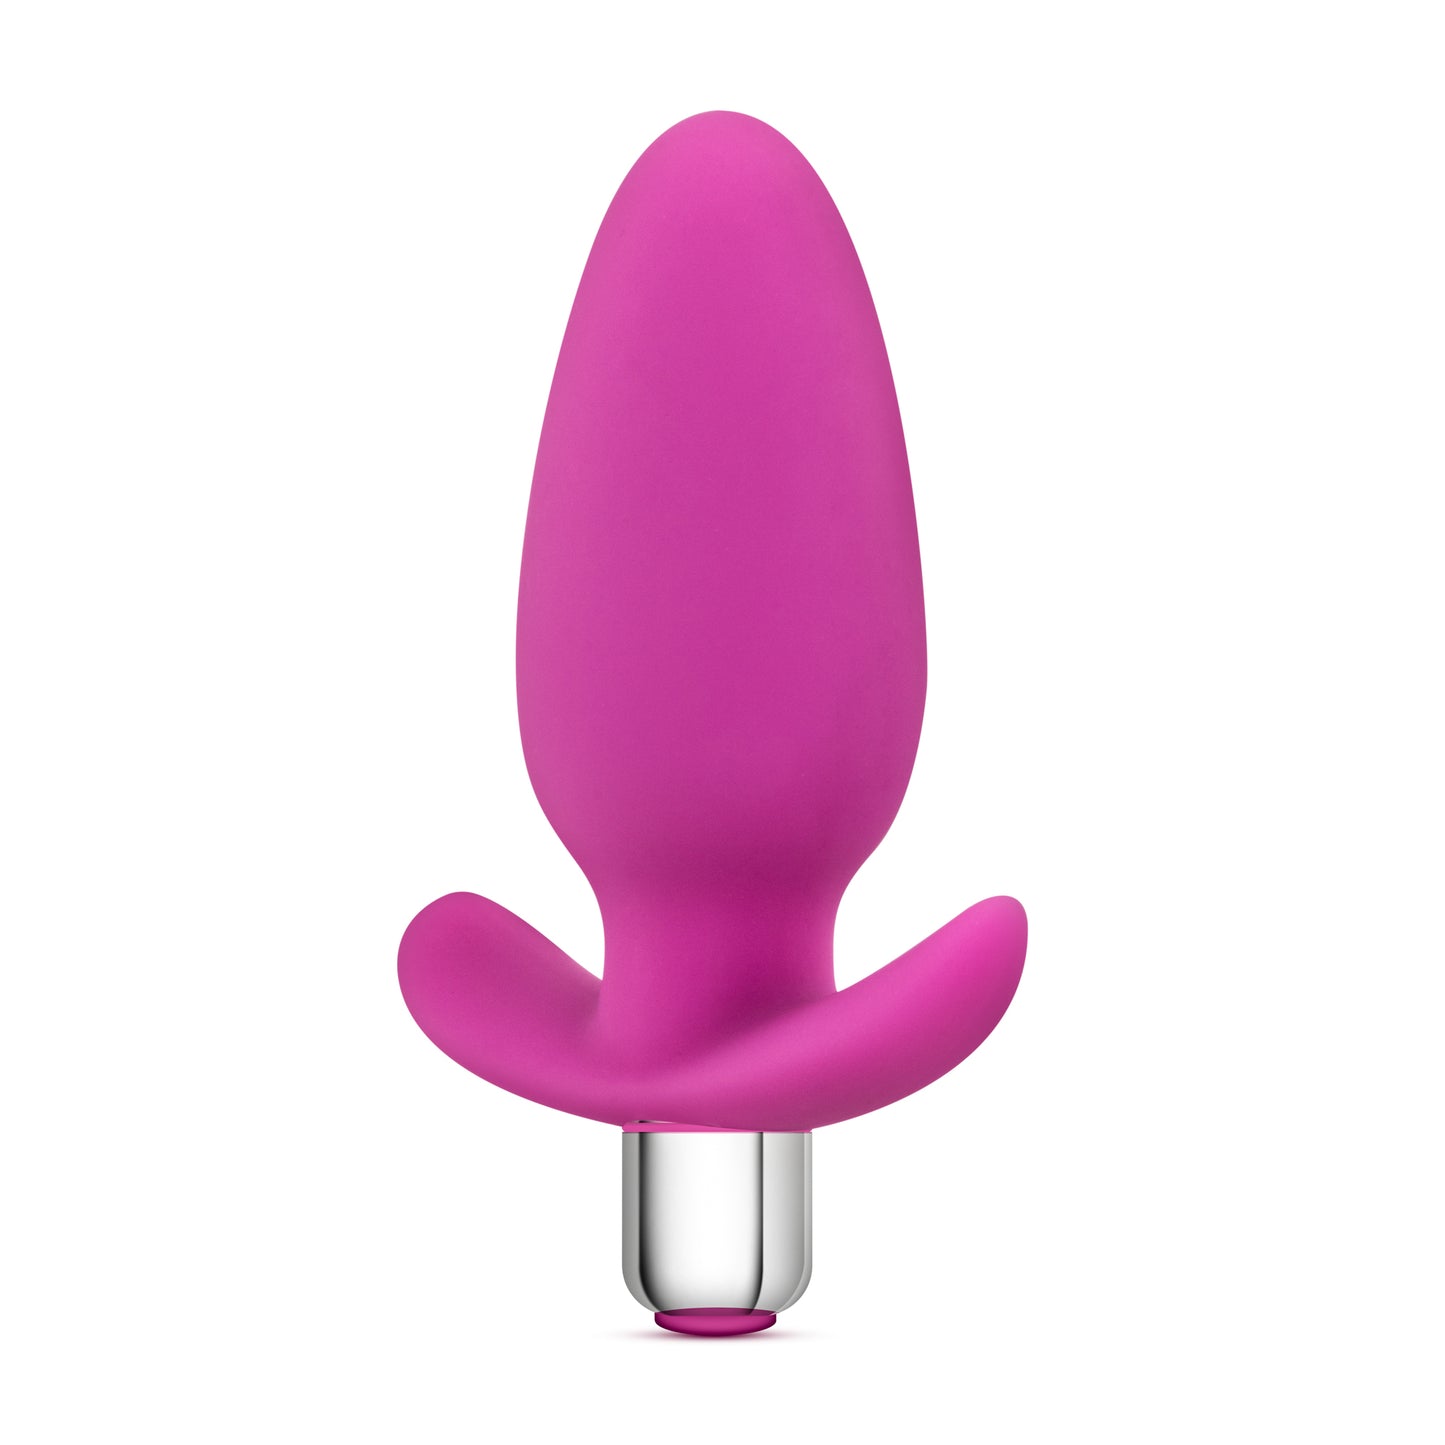 Luxe Little Thumper Pink - Just for you desires